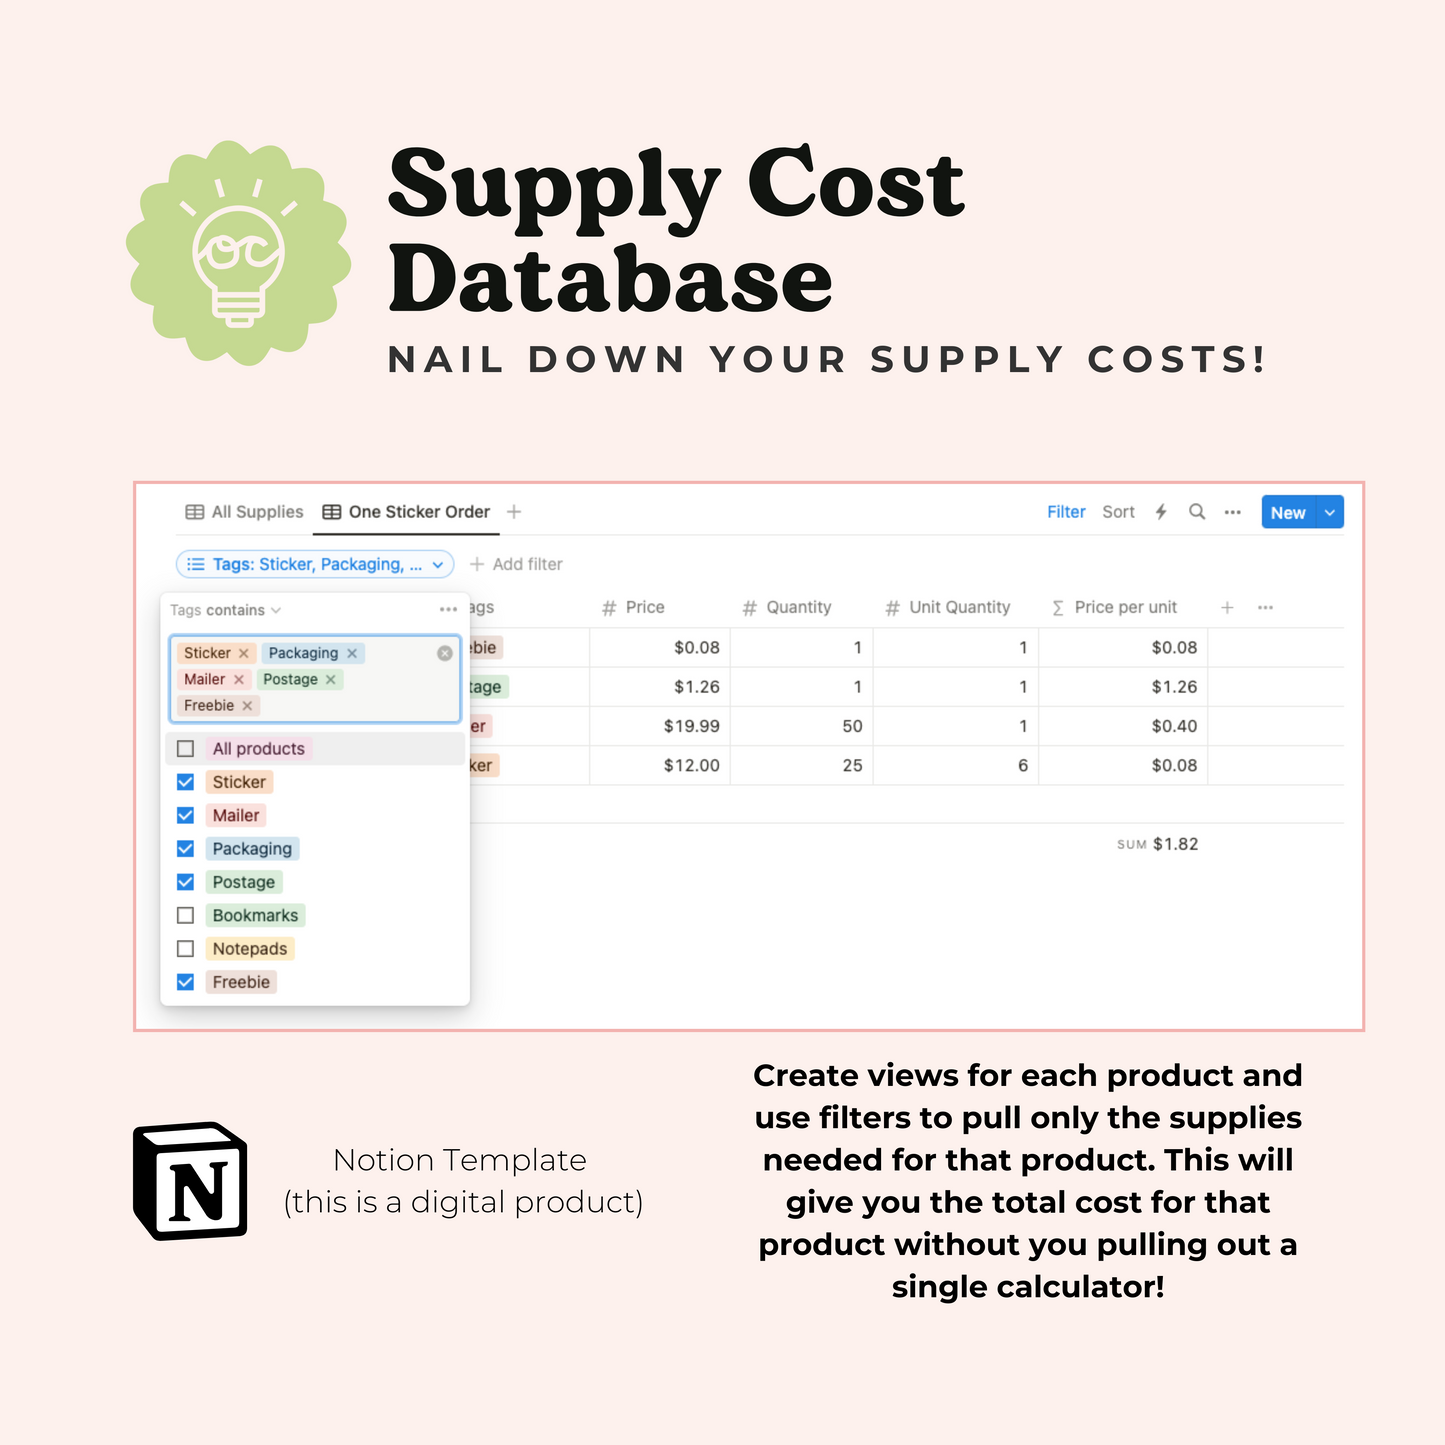 Supply Cost Database